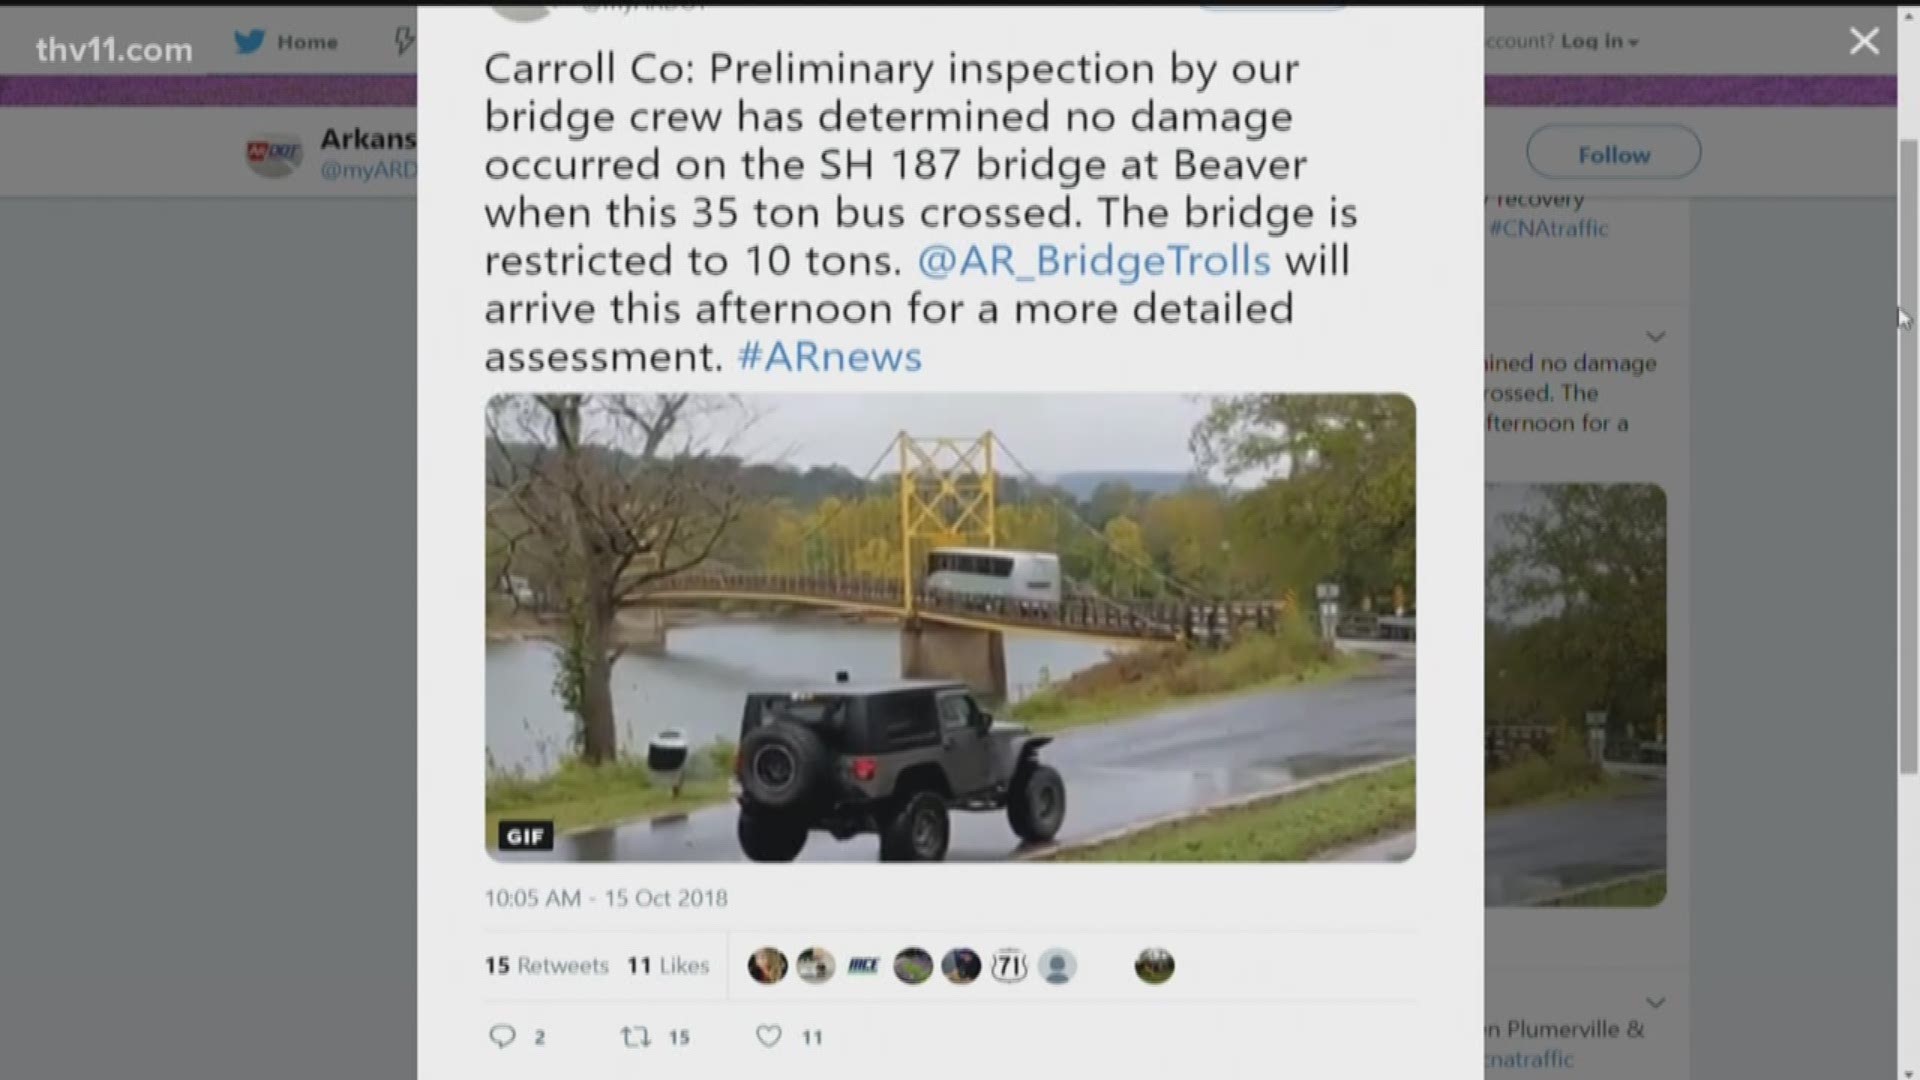 Transportation officials say the Beaver Bridge was not damaged when a 35-ton bus crossed over it.